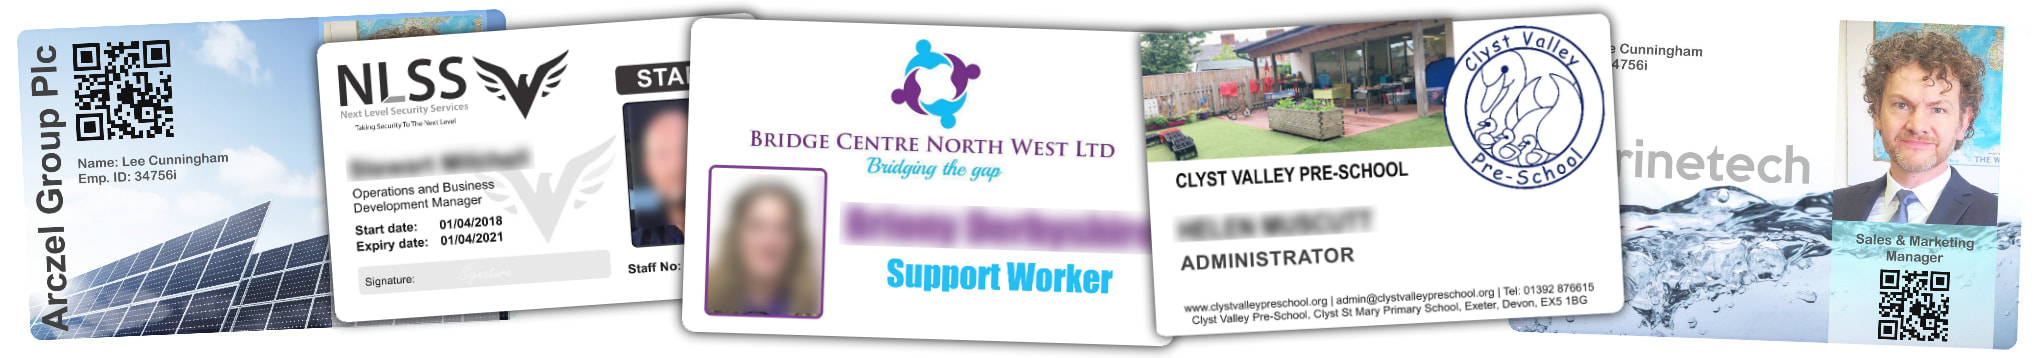 Preston examples of staff photo ID cards | samples of employee Identity card printing | Workers ID cards printed in PR1, Lancashire